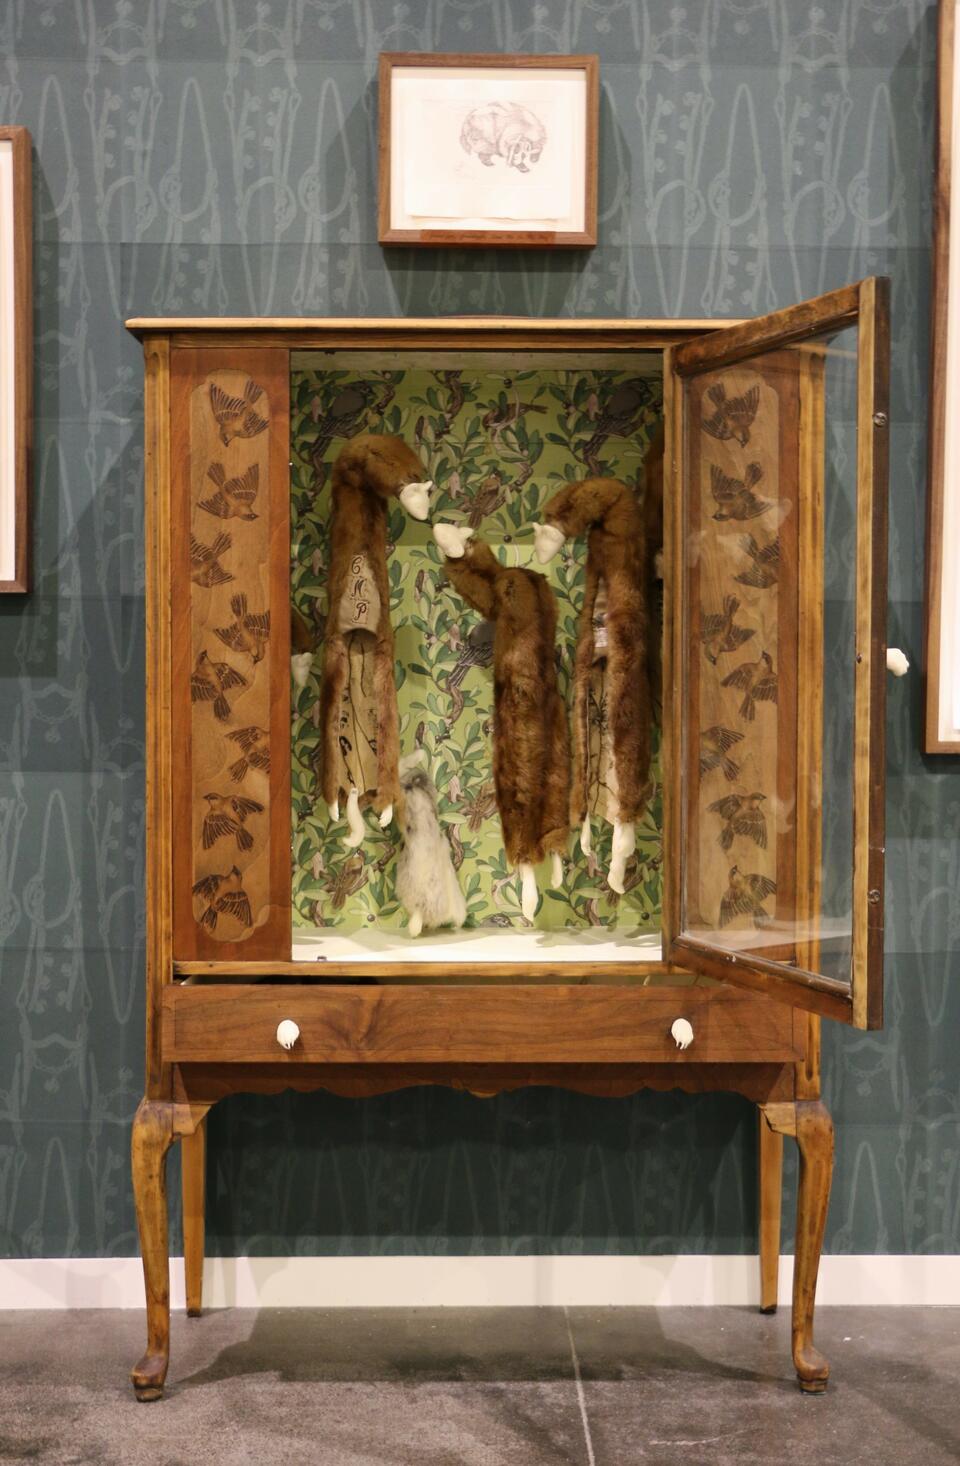 Cabinet with minks and rabbits inside